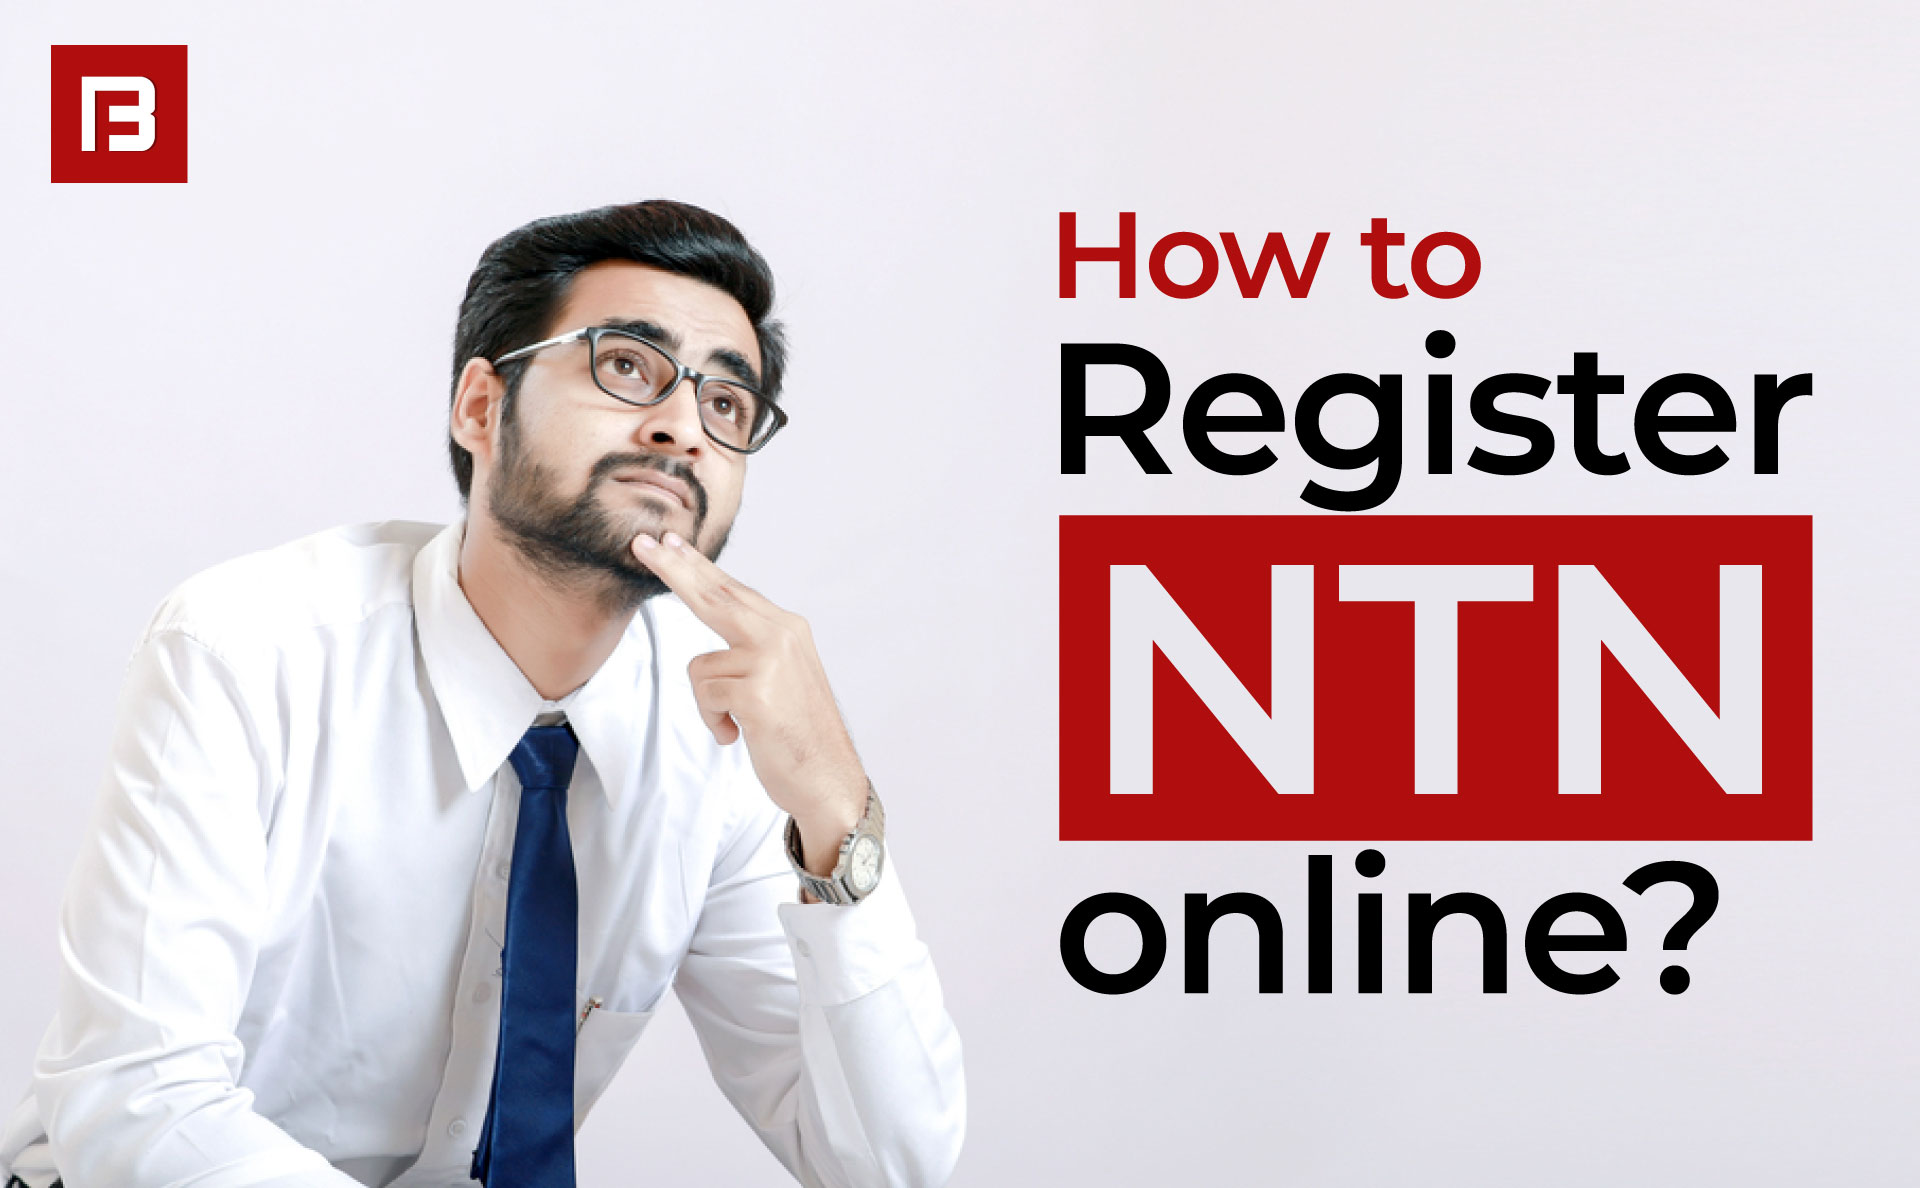 Let’s talk about NTN, why should you register for it?